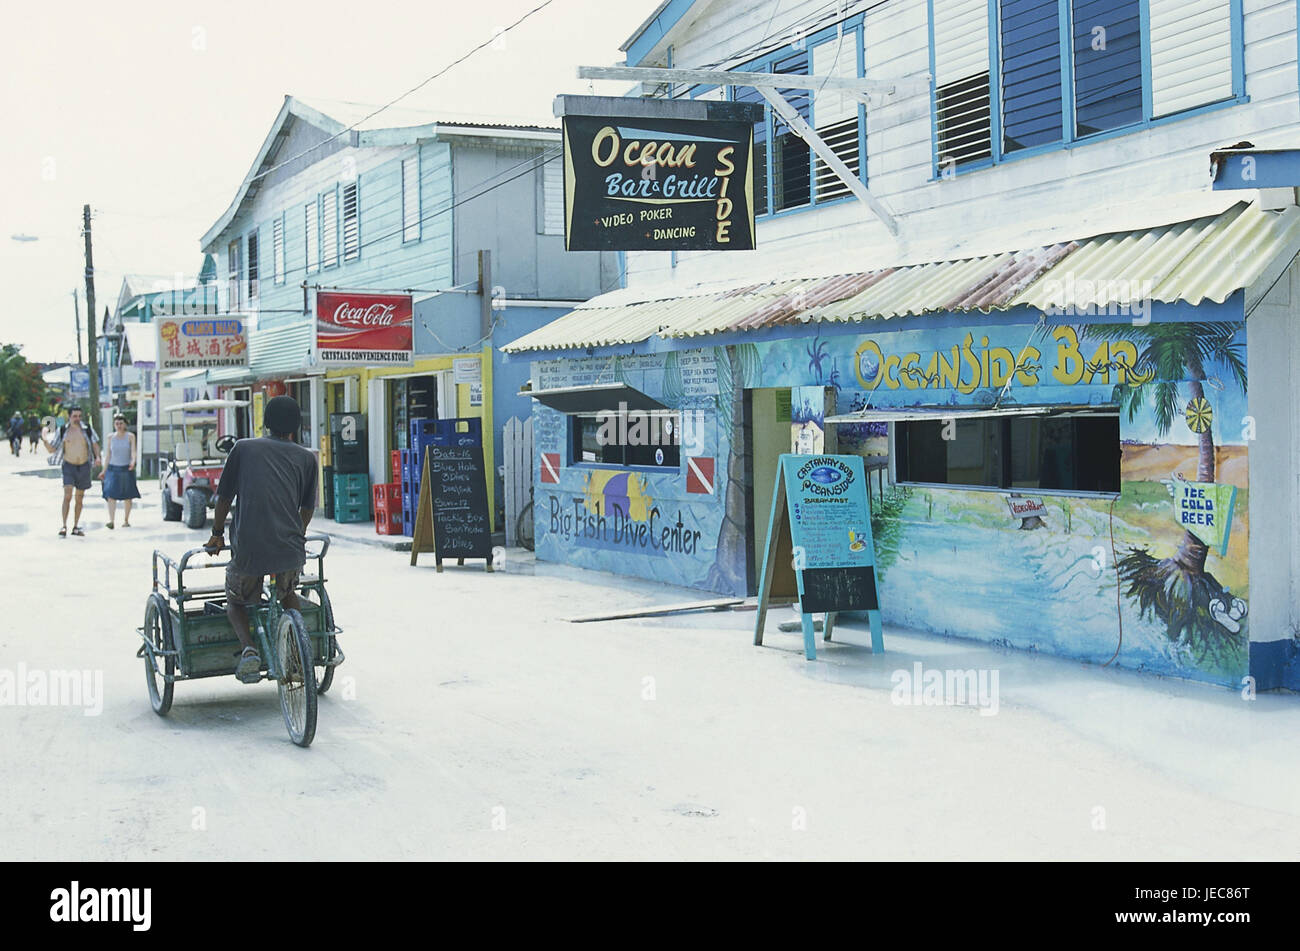 Belize, island Caye Caulker, shopping street, cyclist, tourist, no model release, Central America, destination, place, tourism, building, shops, street, passer-by, pedestrian, person, man, bicycle, bars, bars, restaurants, advertisement signs, Stock Photo